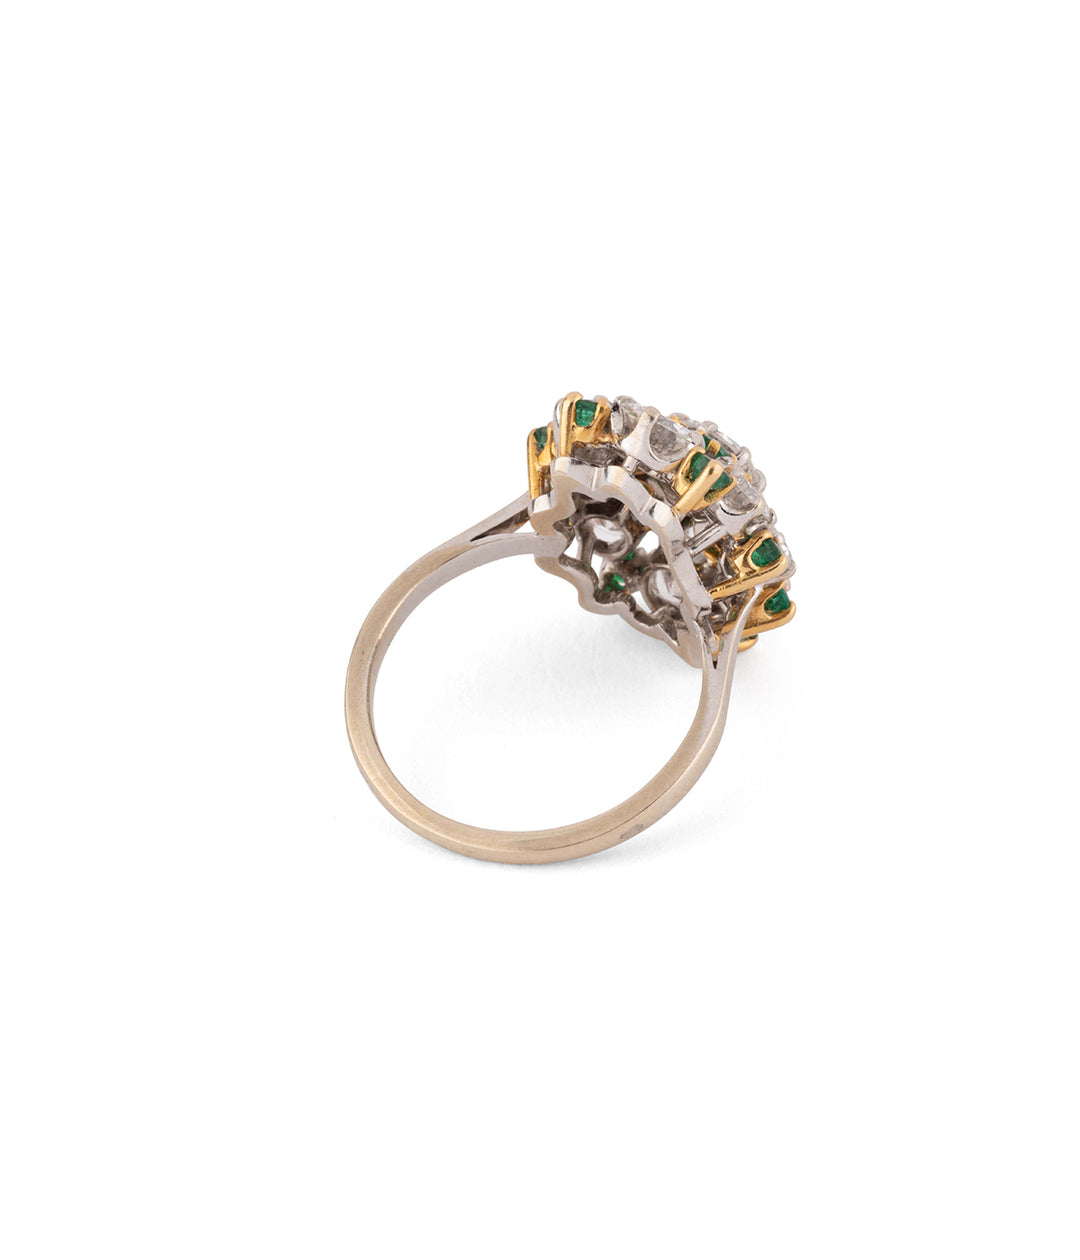 Vintage cluster rind diamonds and emeralds "Dagny" - Caillou Paris